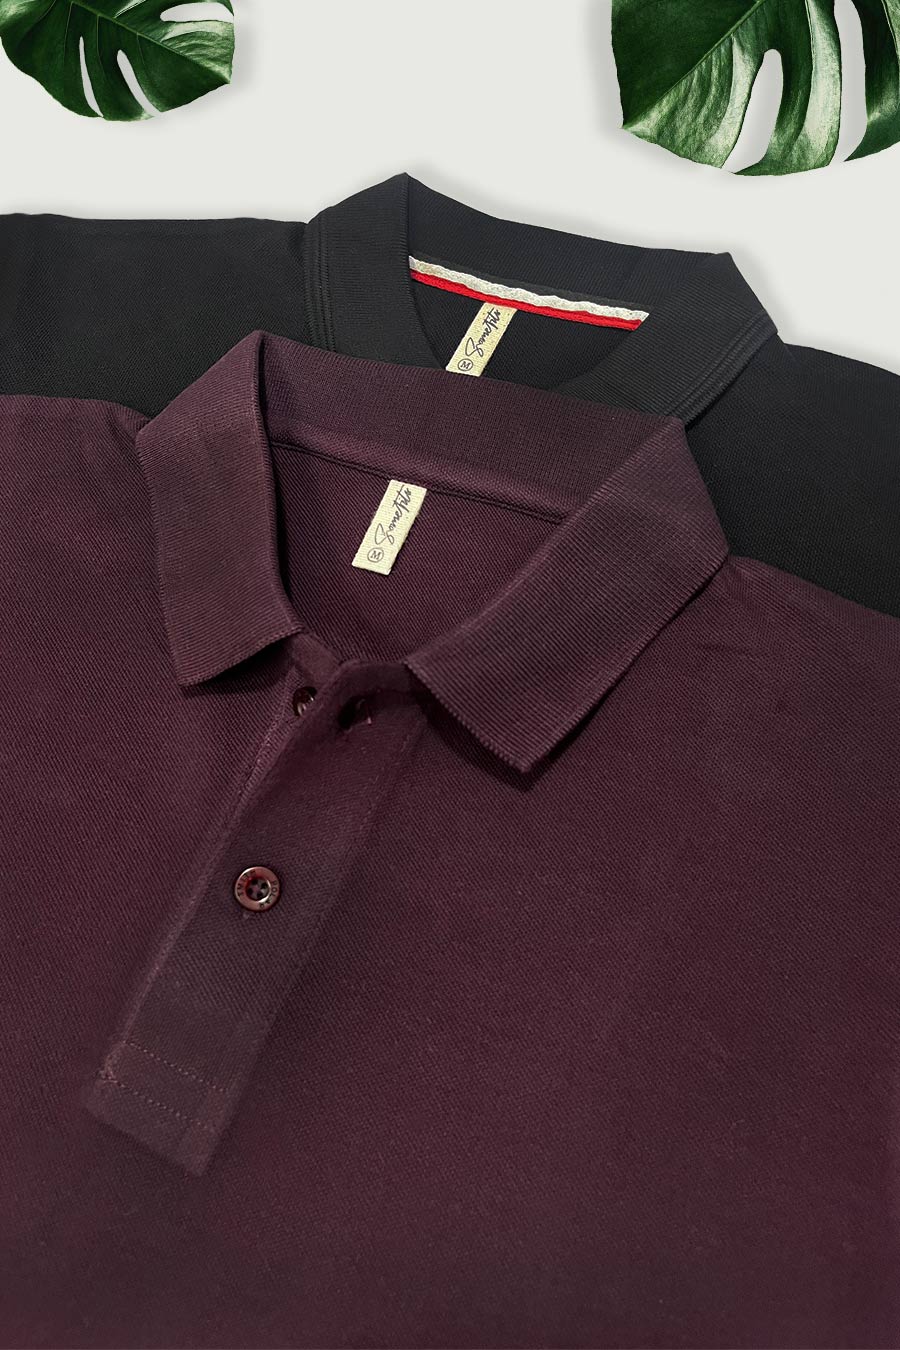 Pack 2 - Black & Wine - Classic Polo